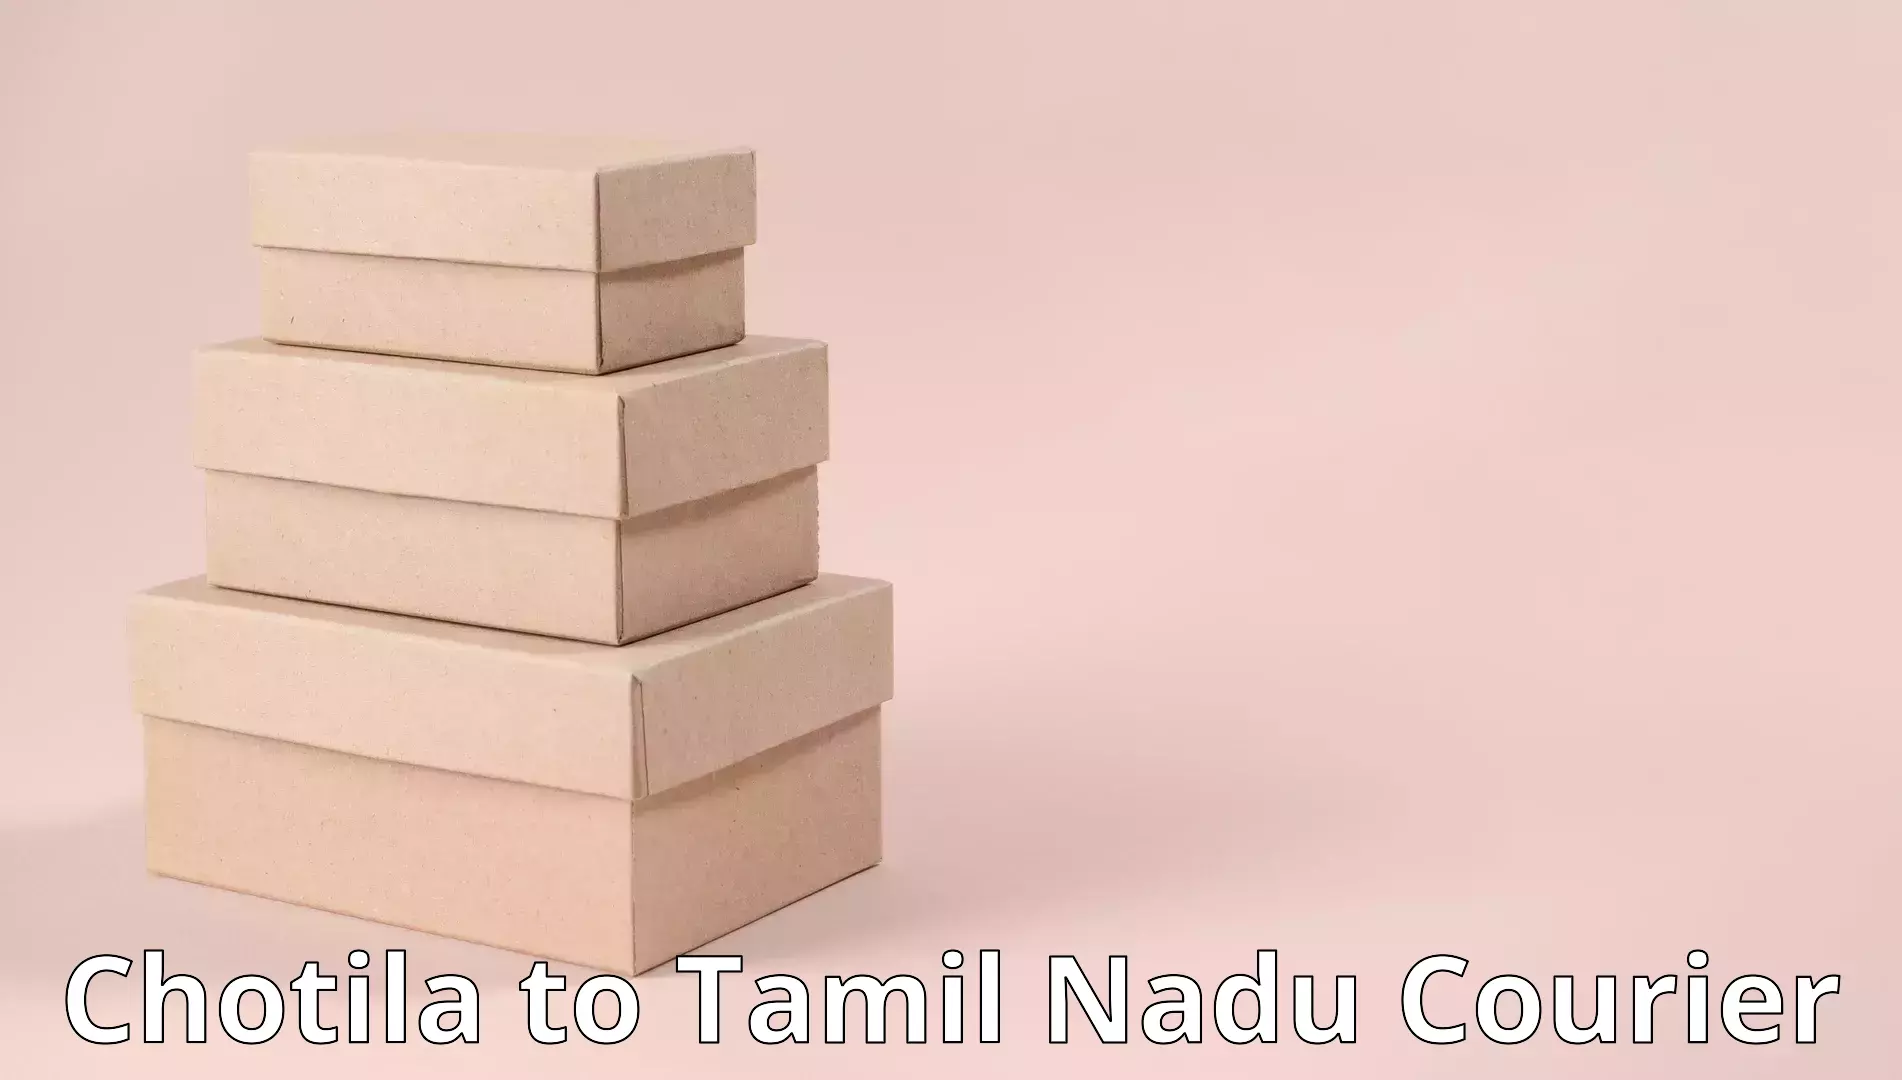 Professional packing services Chotila to Tamil Nadu